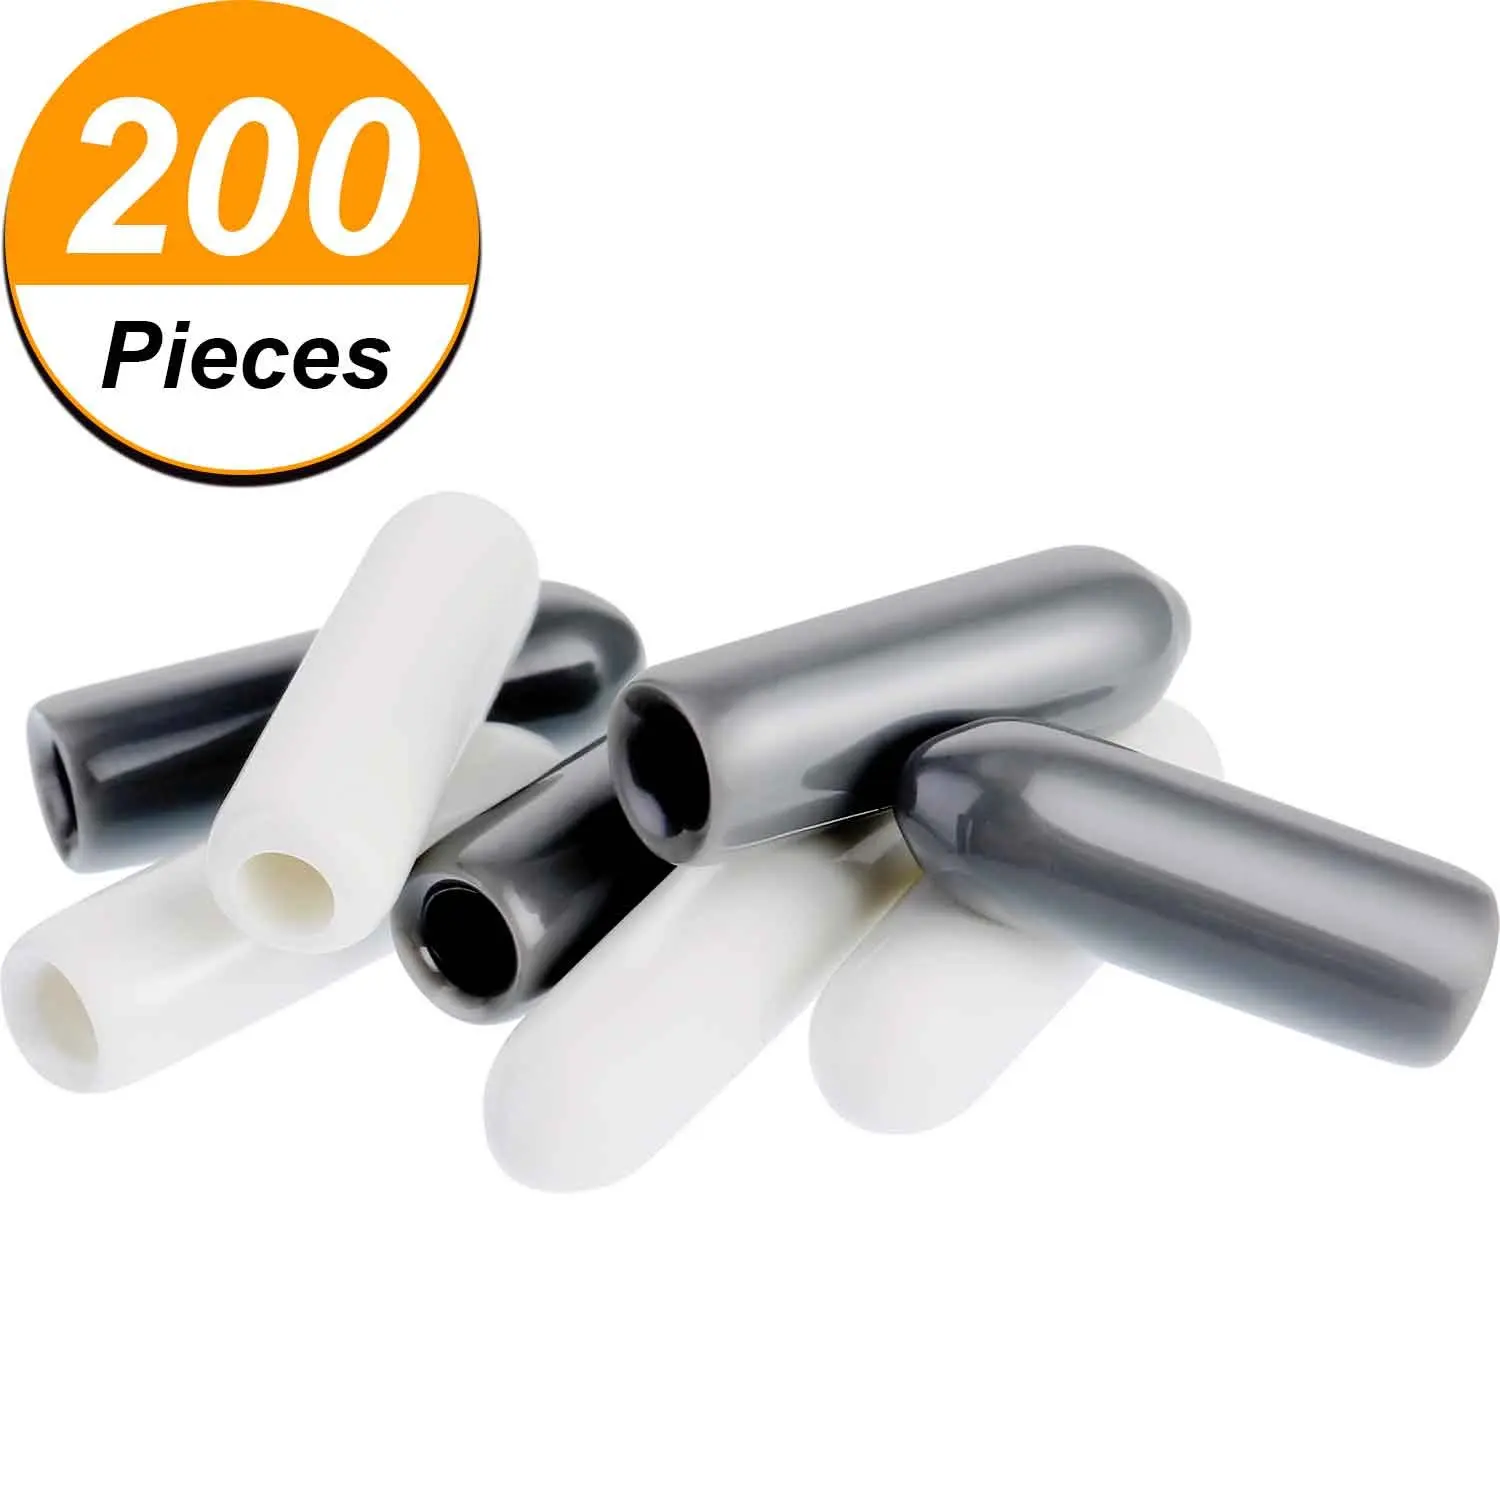 Gray 1/8 Inch/ 3 mm in Inner Diameter 100 Pieces Dishwasher Rack Tip Tine Cover Caps Prong Rack Caps Just Push on to Repair 